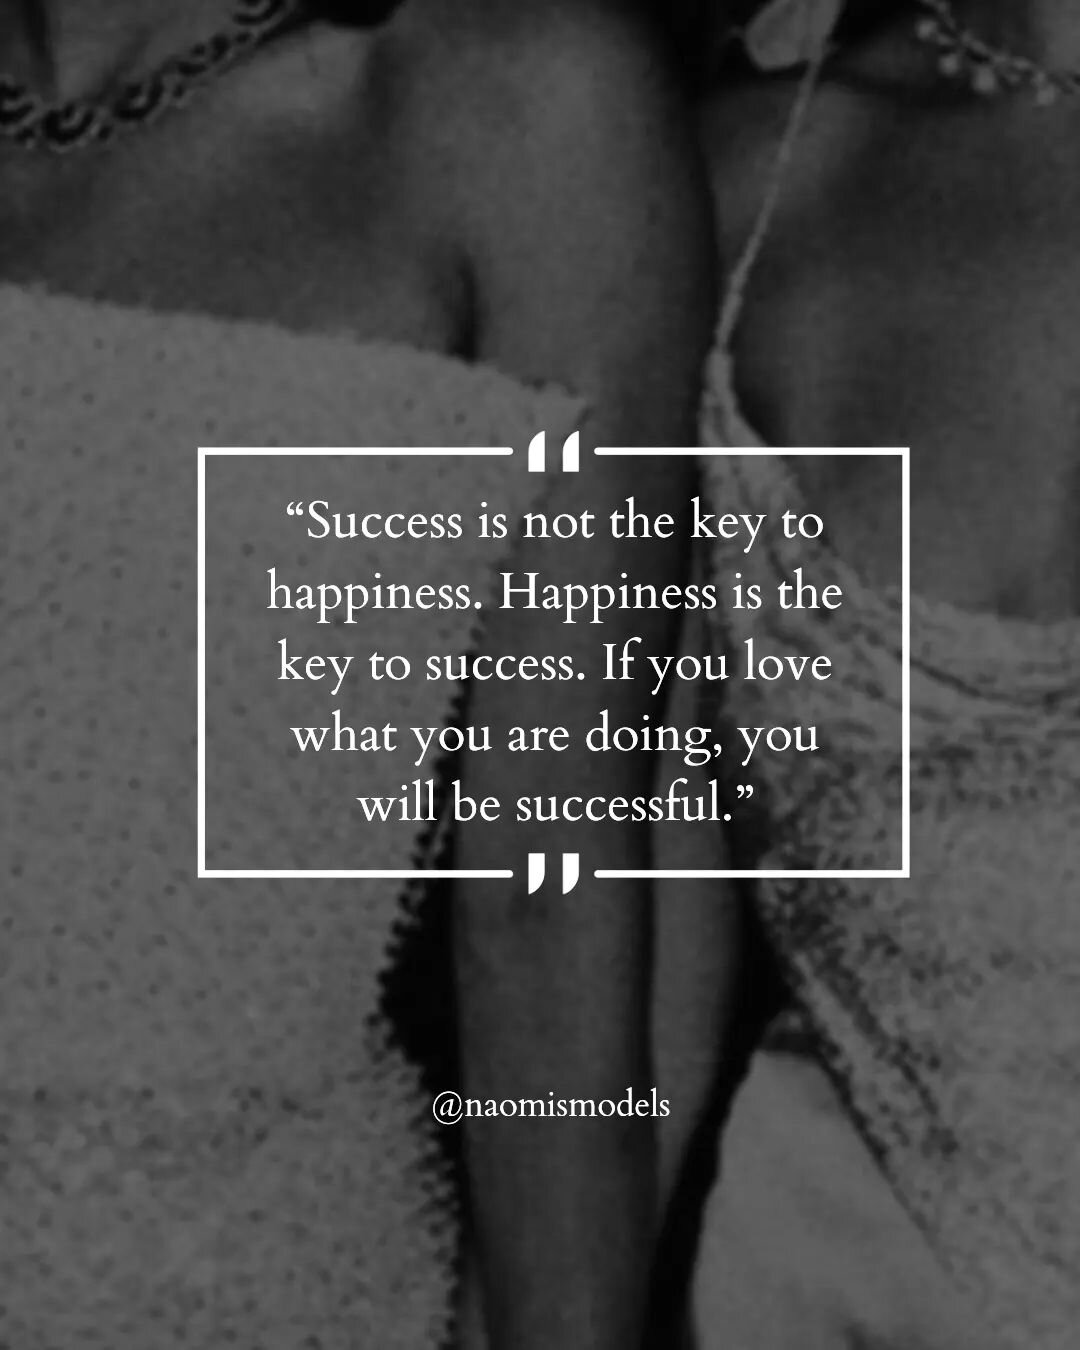 &ldquo;Success is not the key to happiness. Happiness is the key to success. If you love what you are doing, you will be successful.&rdquo;

#naomismodels #quoteoftheday #inspiration #motivation #models #nycmodels #castingagency #modelscout #selflove